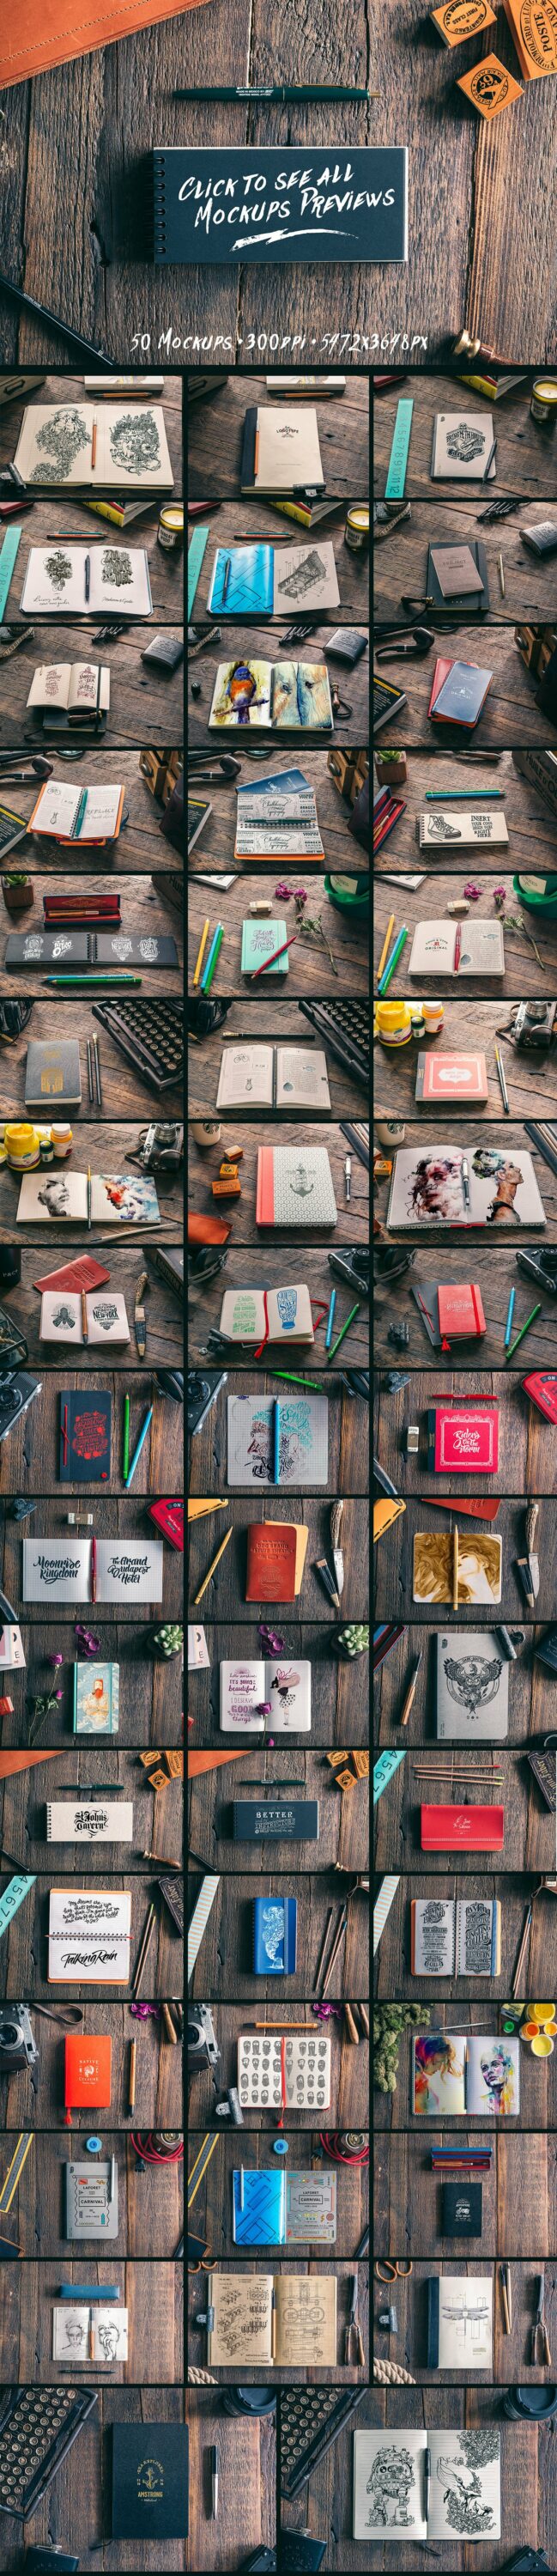 So big notebooks collection in the different colors and designs.